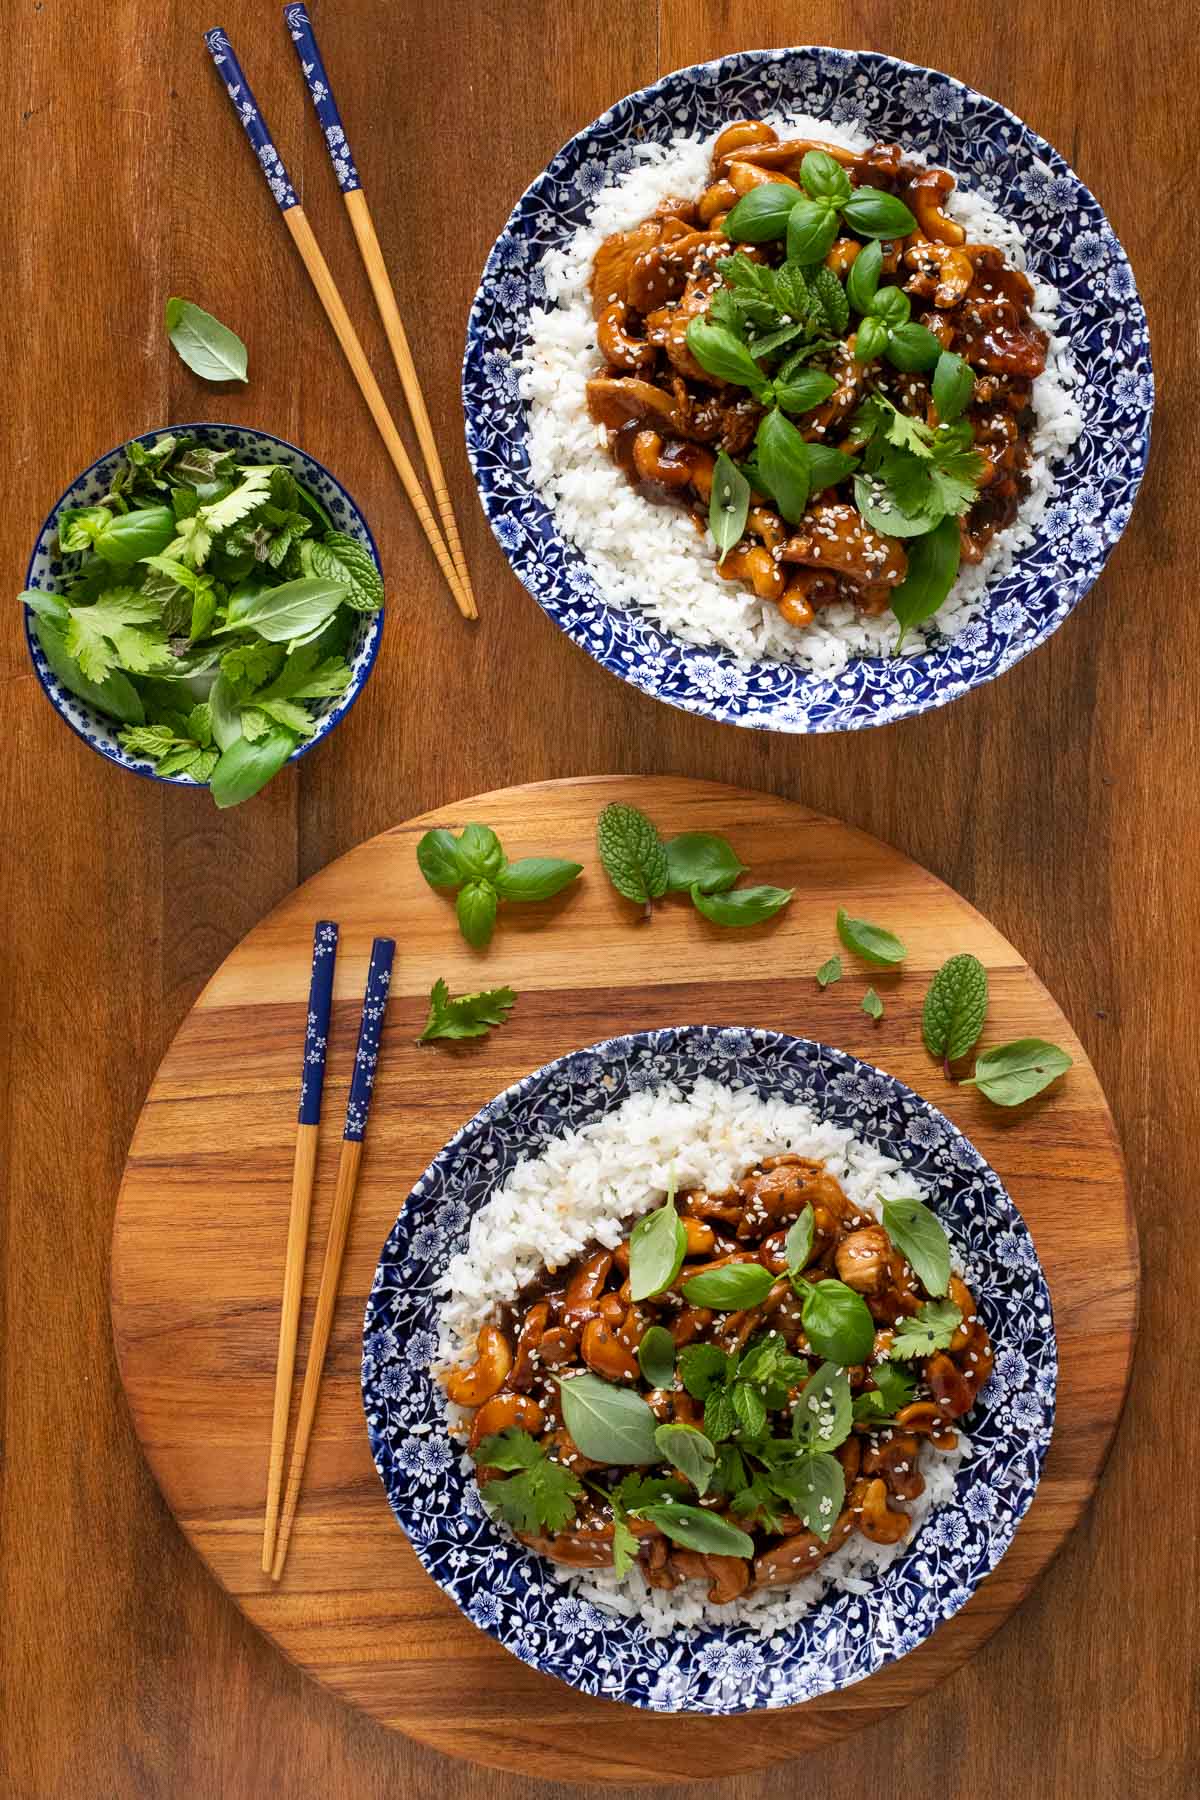 Overhead vertical photo of Hoisin Cashew Chicken and rice in blue and white patterned bowls on a wood table.